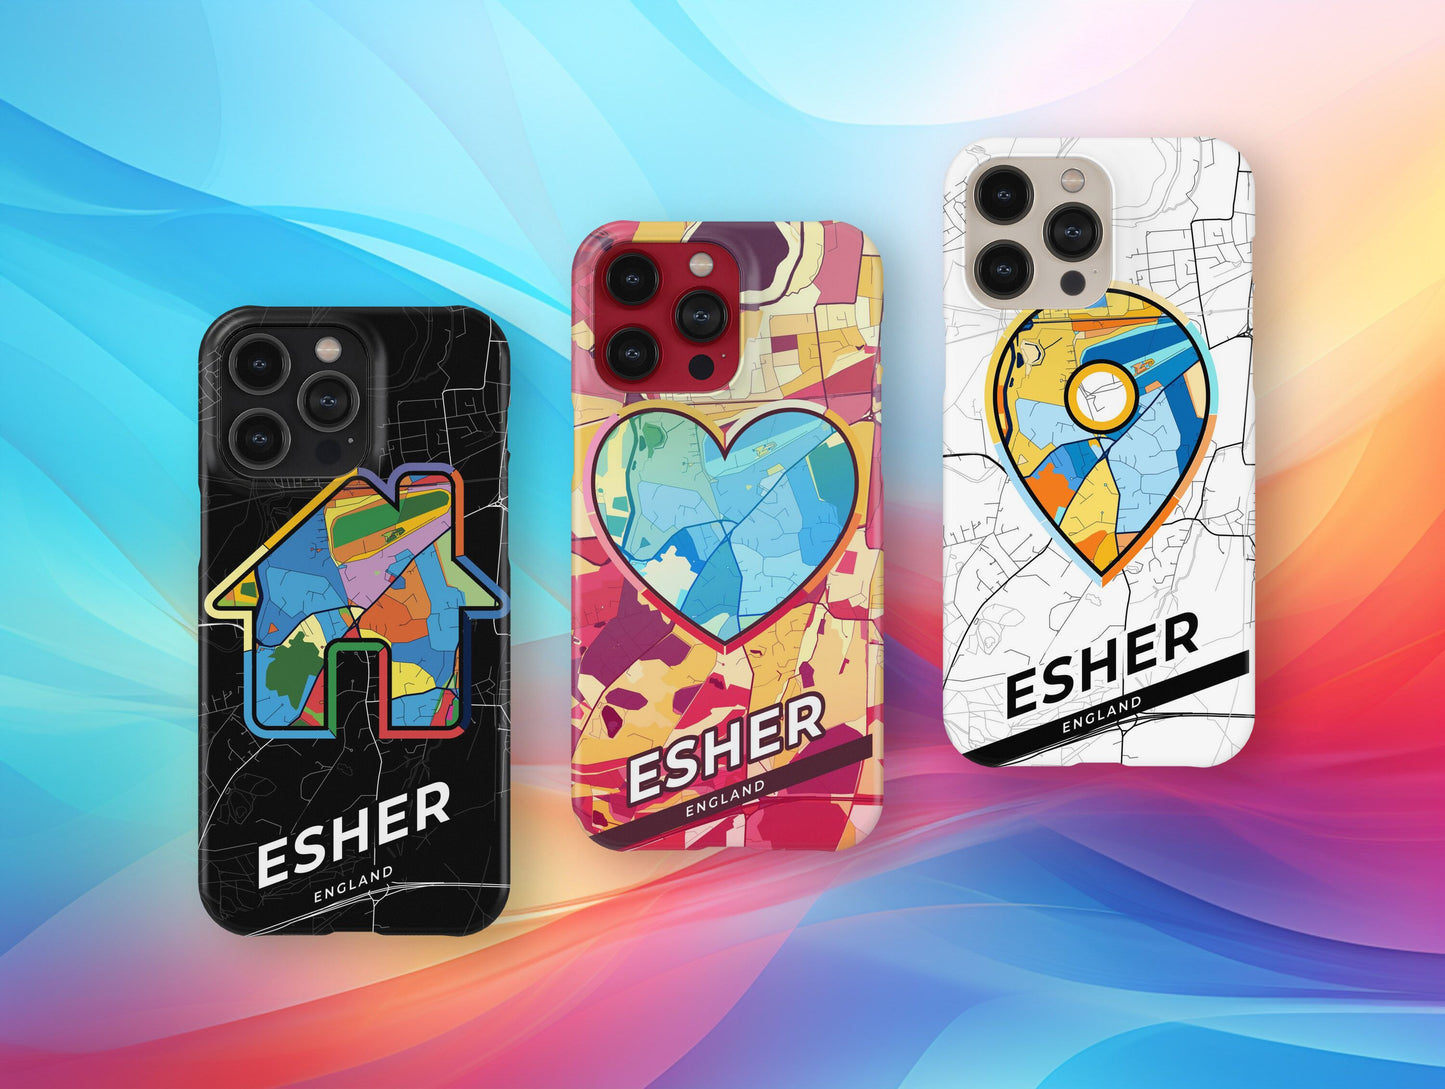 Esher England slim phone case with colorful icon. Birthday, wedding or housewarming gift. Couple match cases.